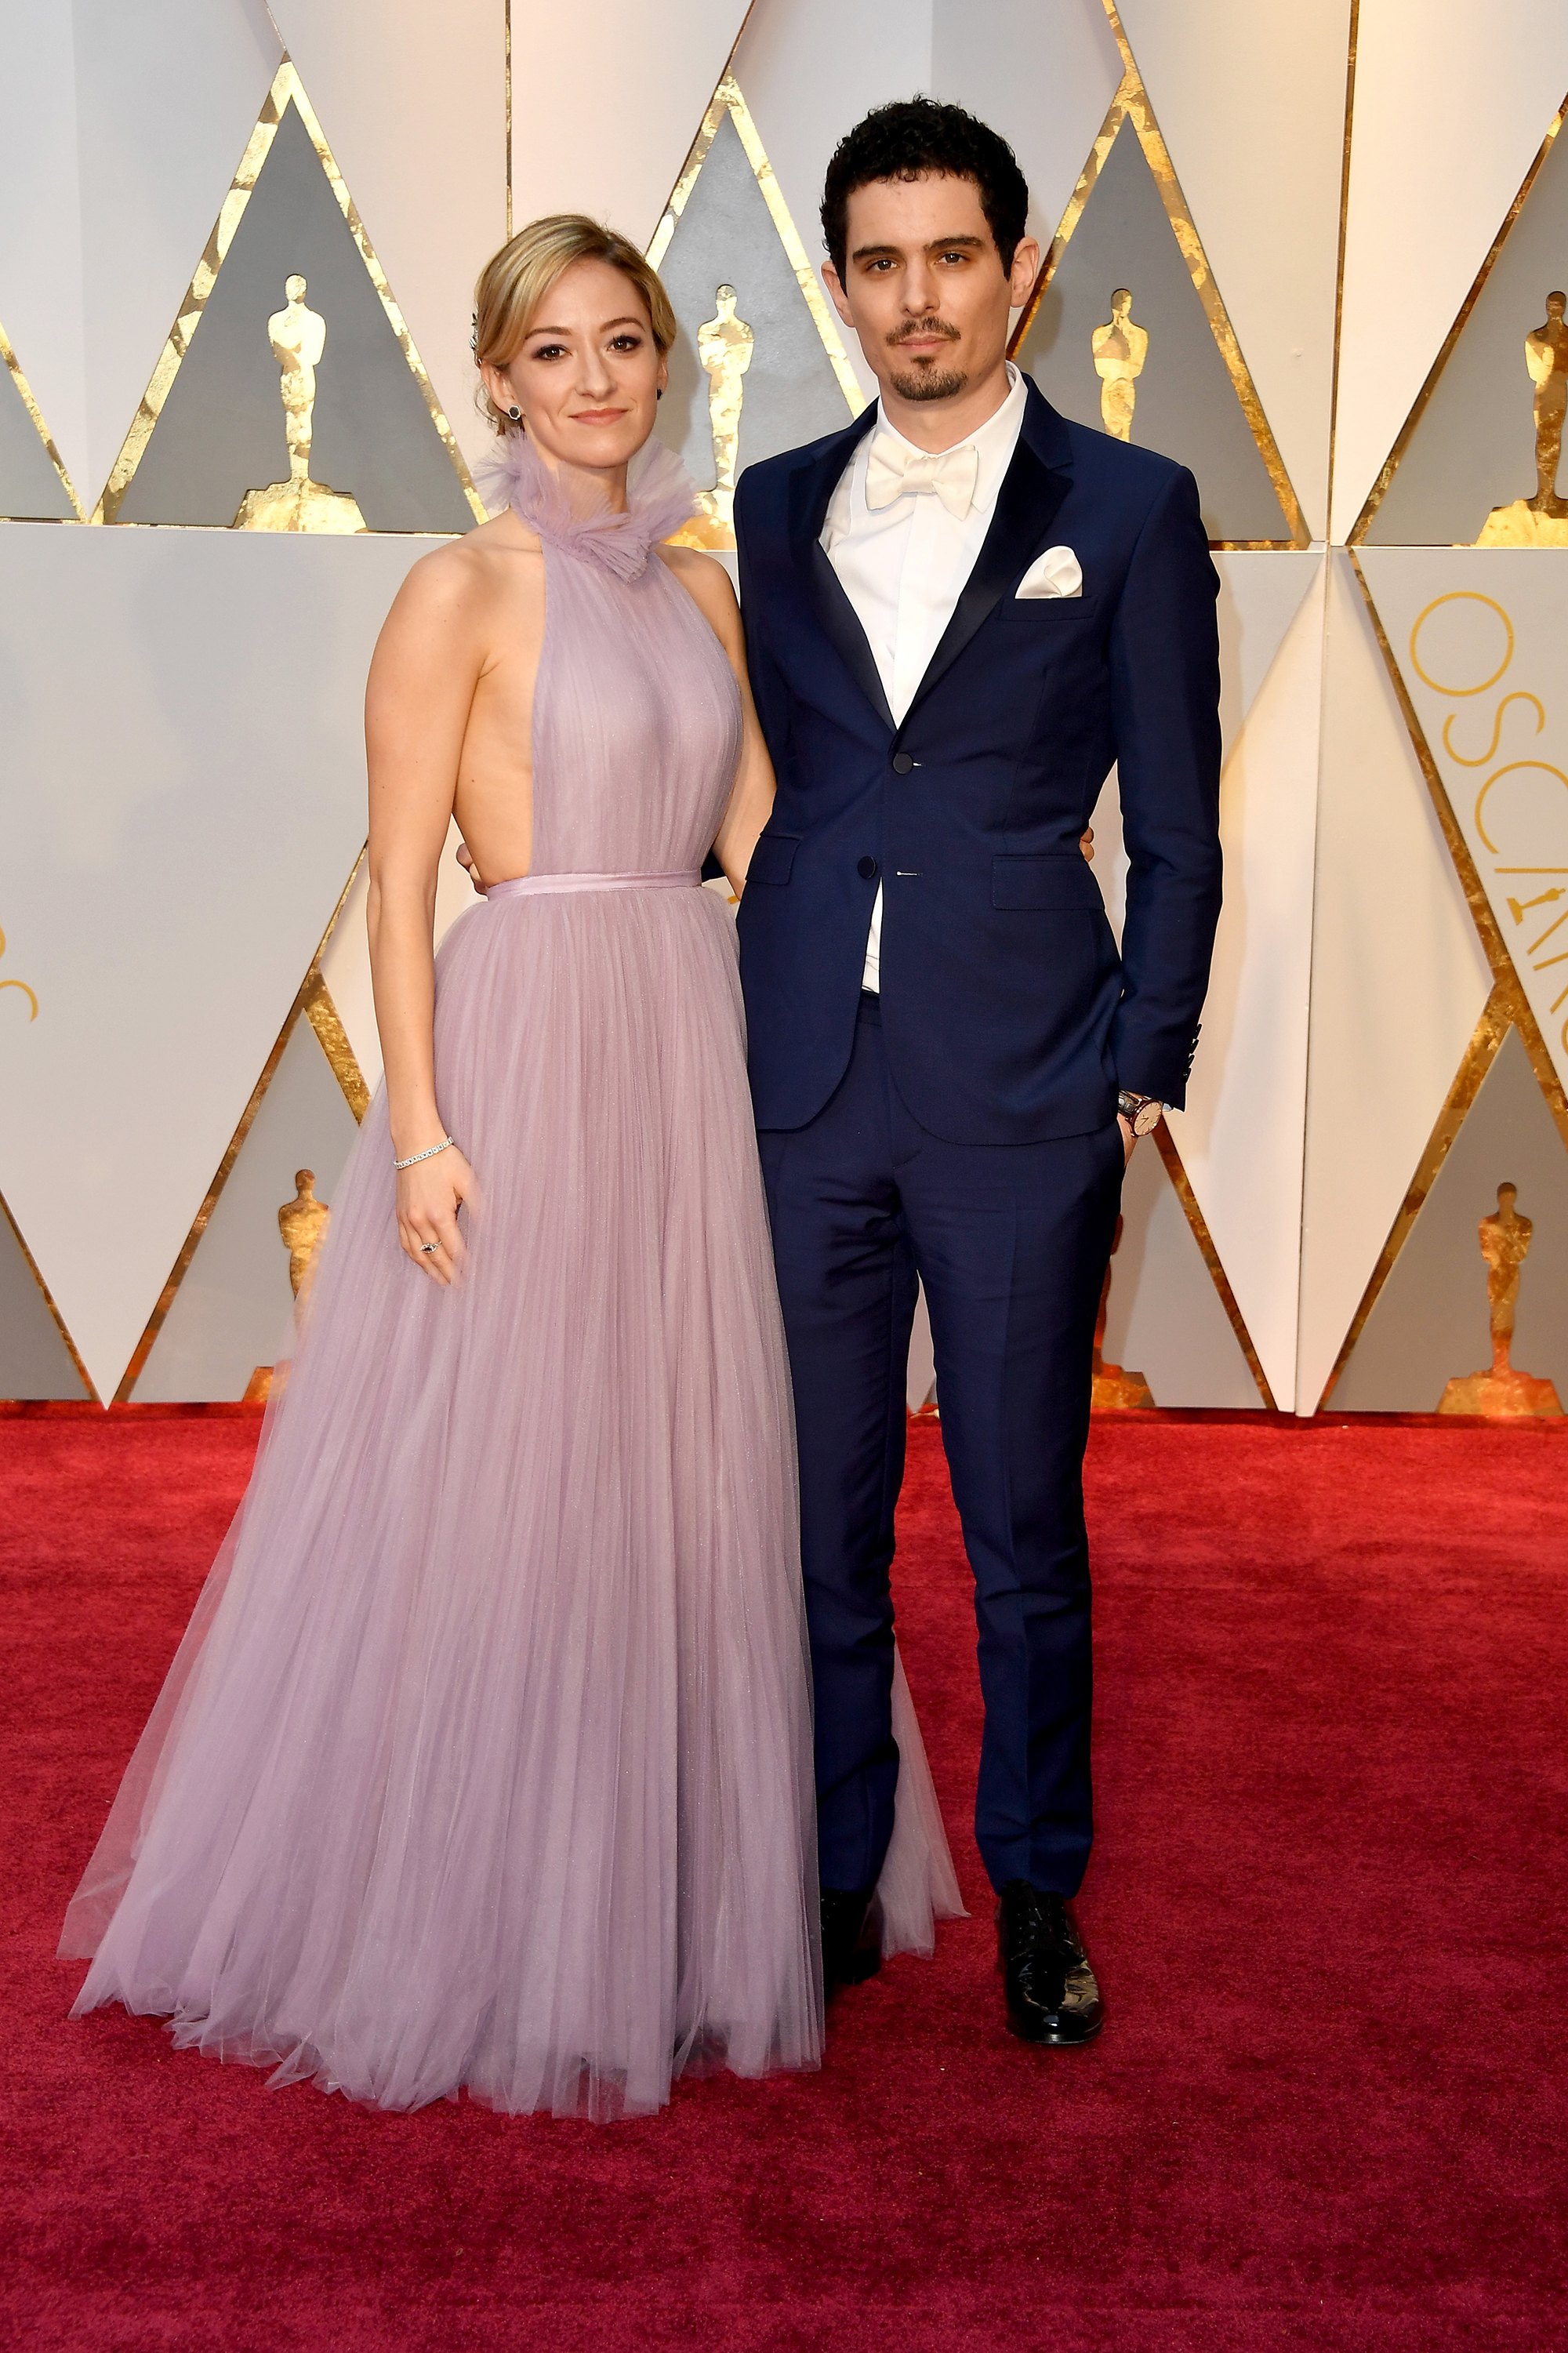 Olivia Hamilton and Damien Chazelle on the red carpet for the 89th Oscars, on Feb. 26, 2017 in Hollywood, Calif.